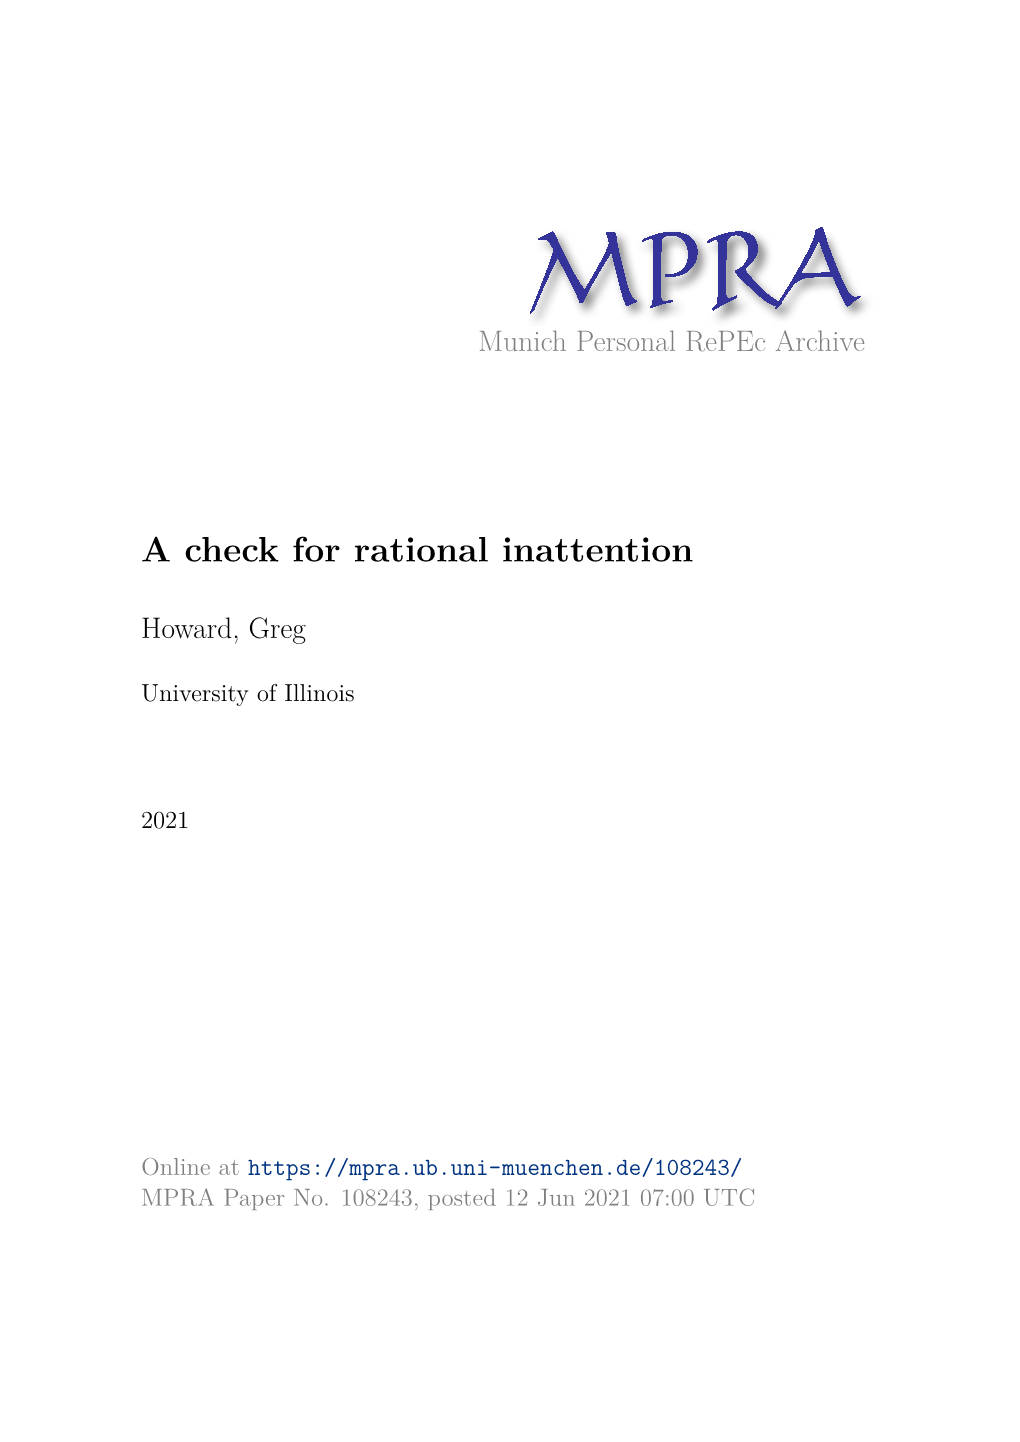 A Check for Rational Inattention